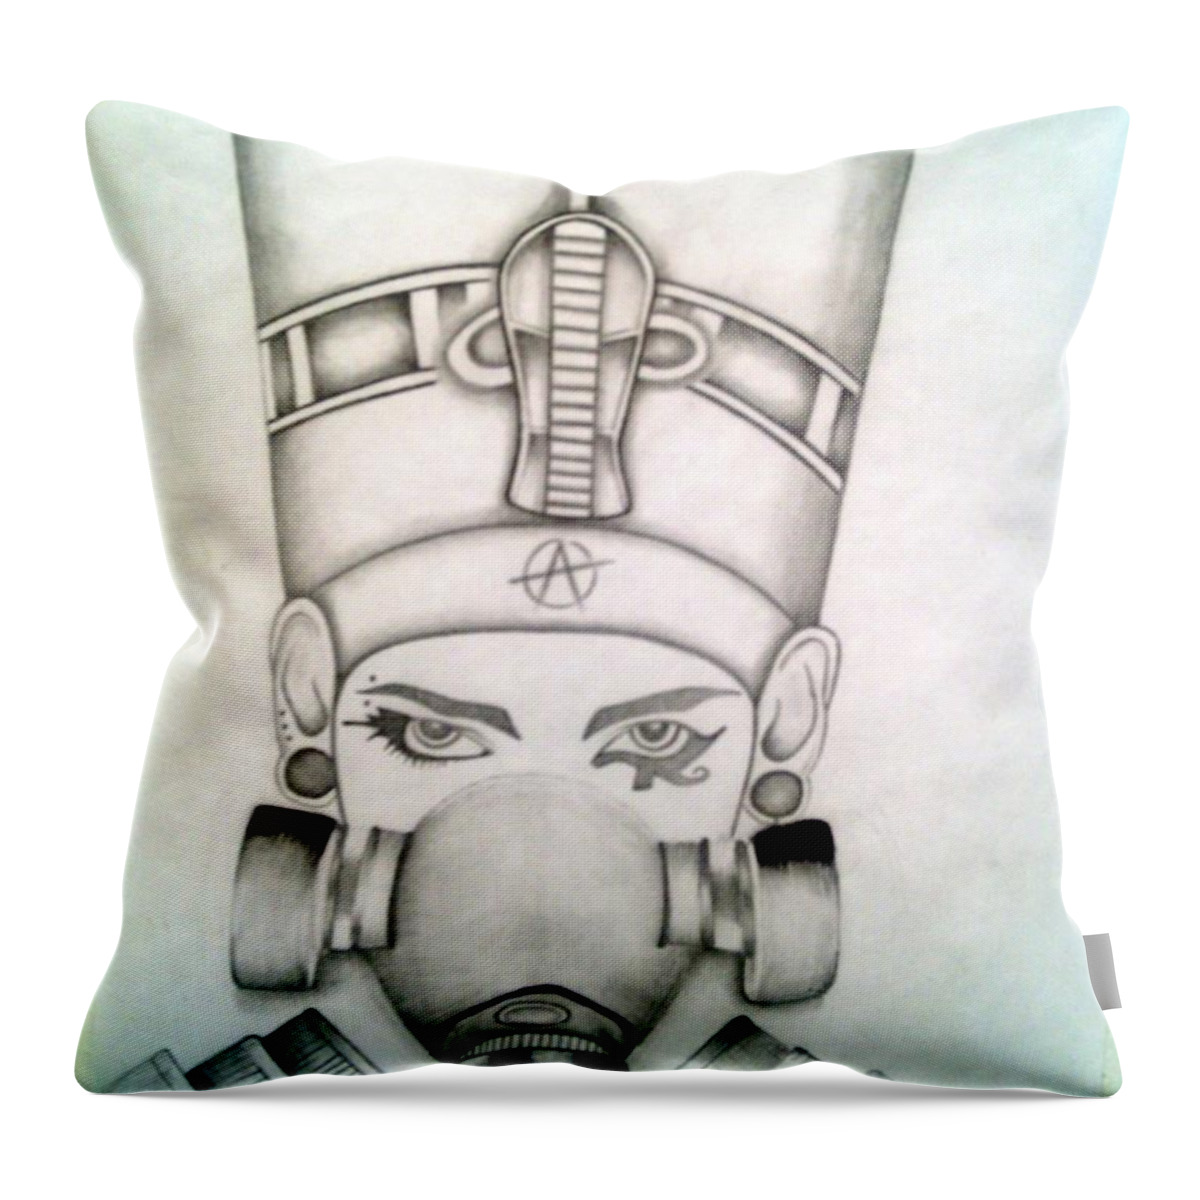 Black Art Throw Pillow featuring the drawing Untitled by A S 